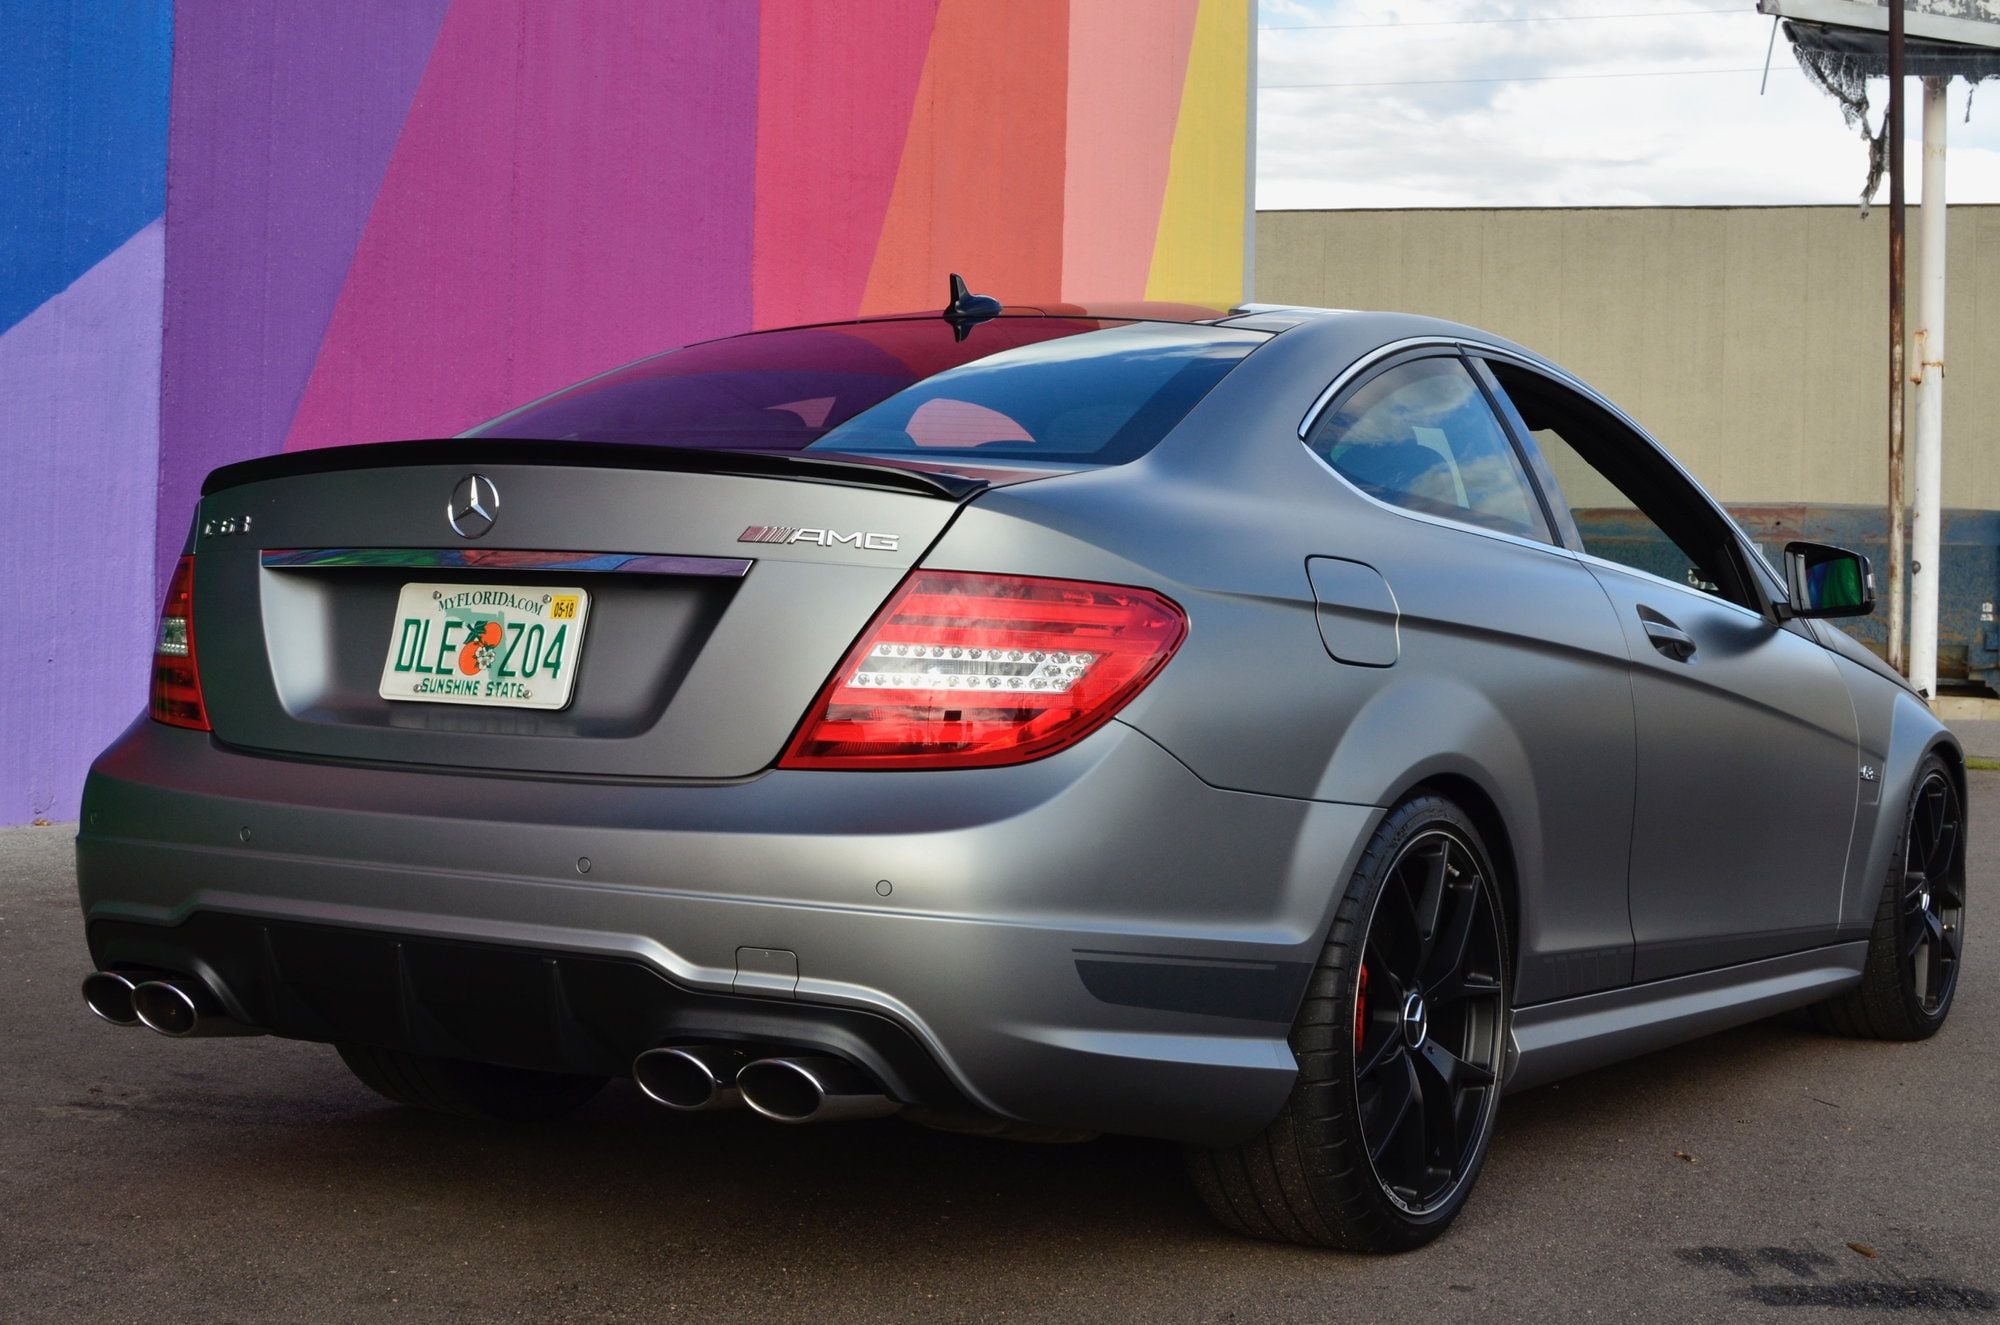 2014 - 2015 Mercedes-Benz C63 AMG - Looking for a Magno Platinum Edition 507 Coupe; - Used - 50,000 Miles - 8 cyl - 2WD - Automatic - Coupe - Gray - Raleigh, NC 27607, United States